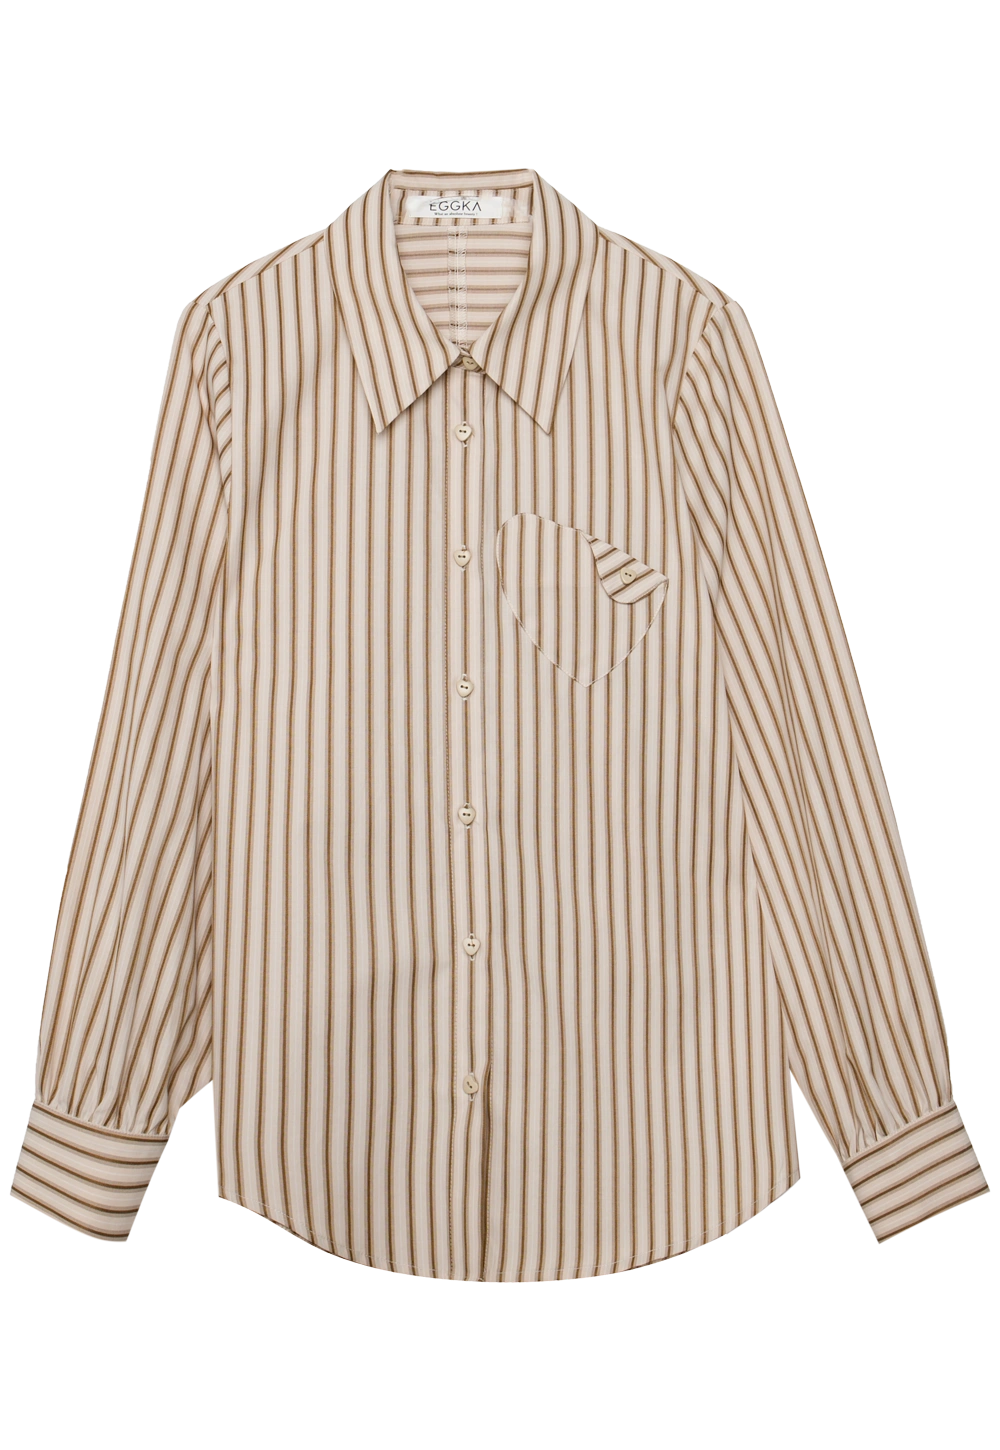 Women's Casual Striped Button-Down Shirt with Chest Pocket - Long Sleeve, Cotton Blend, Olive and Cream